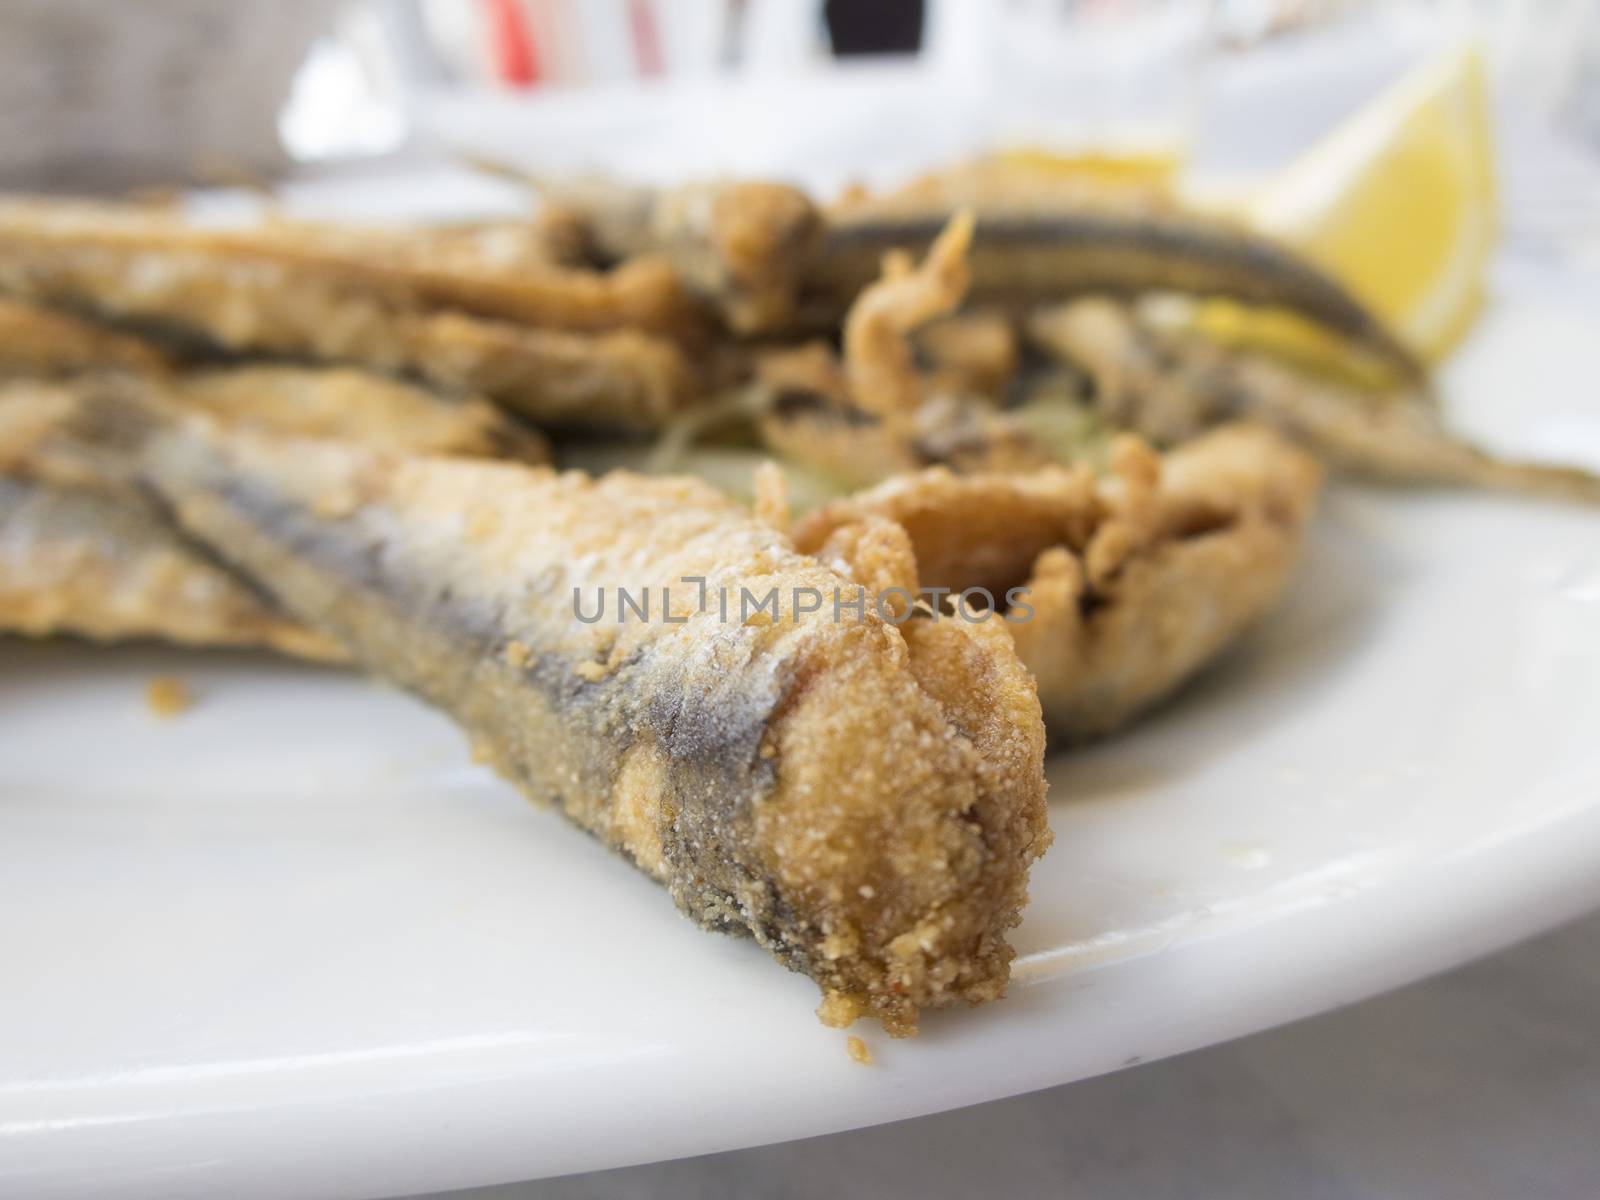 fried sardine detail by quintanilla